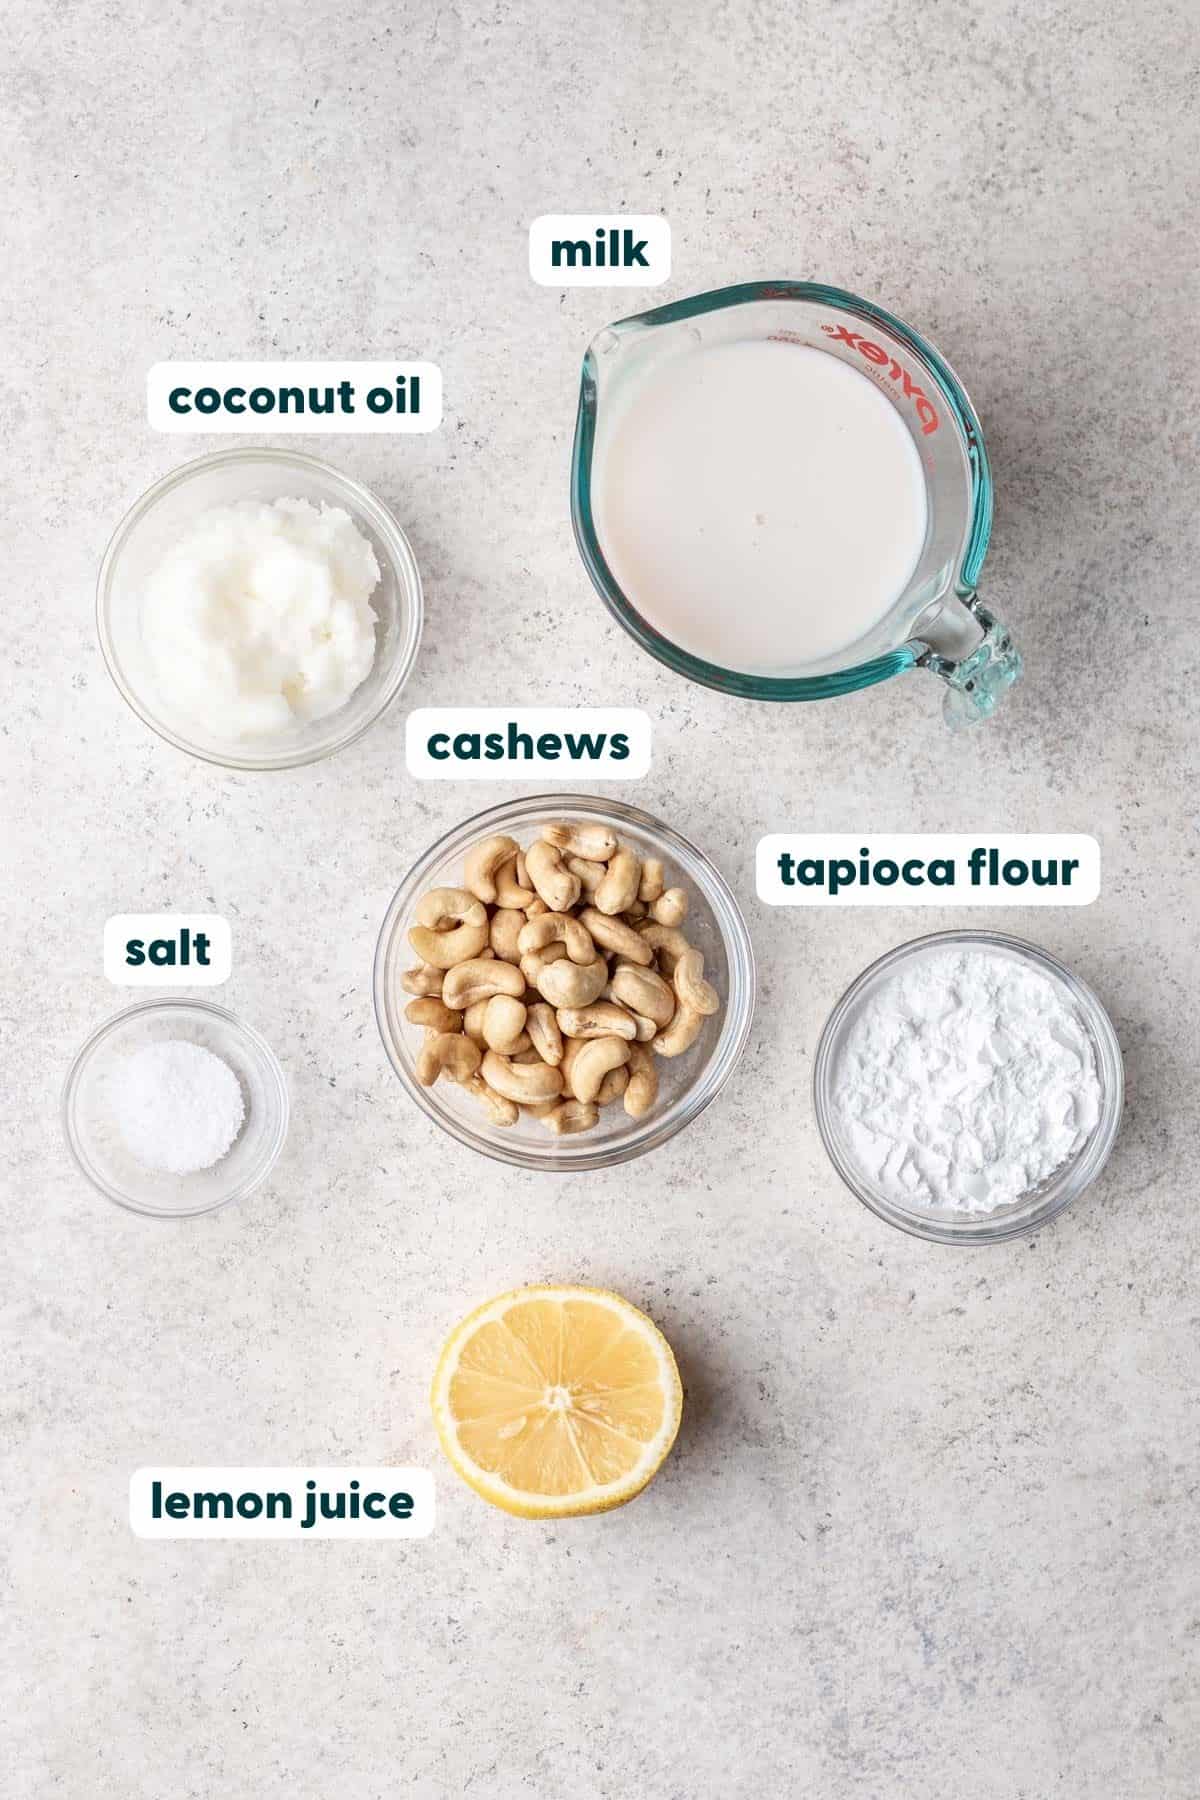 Ingredients measured and labeled for cashew mozzarella cheese.